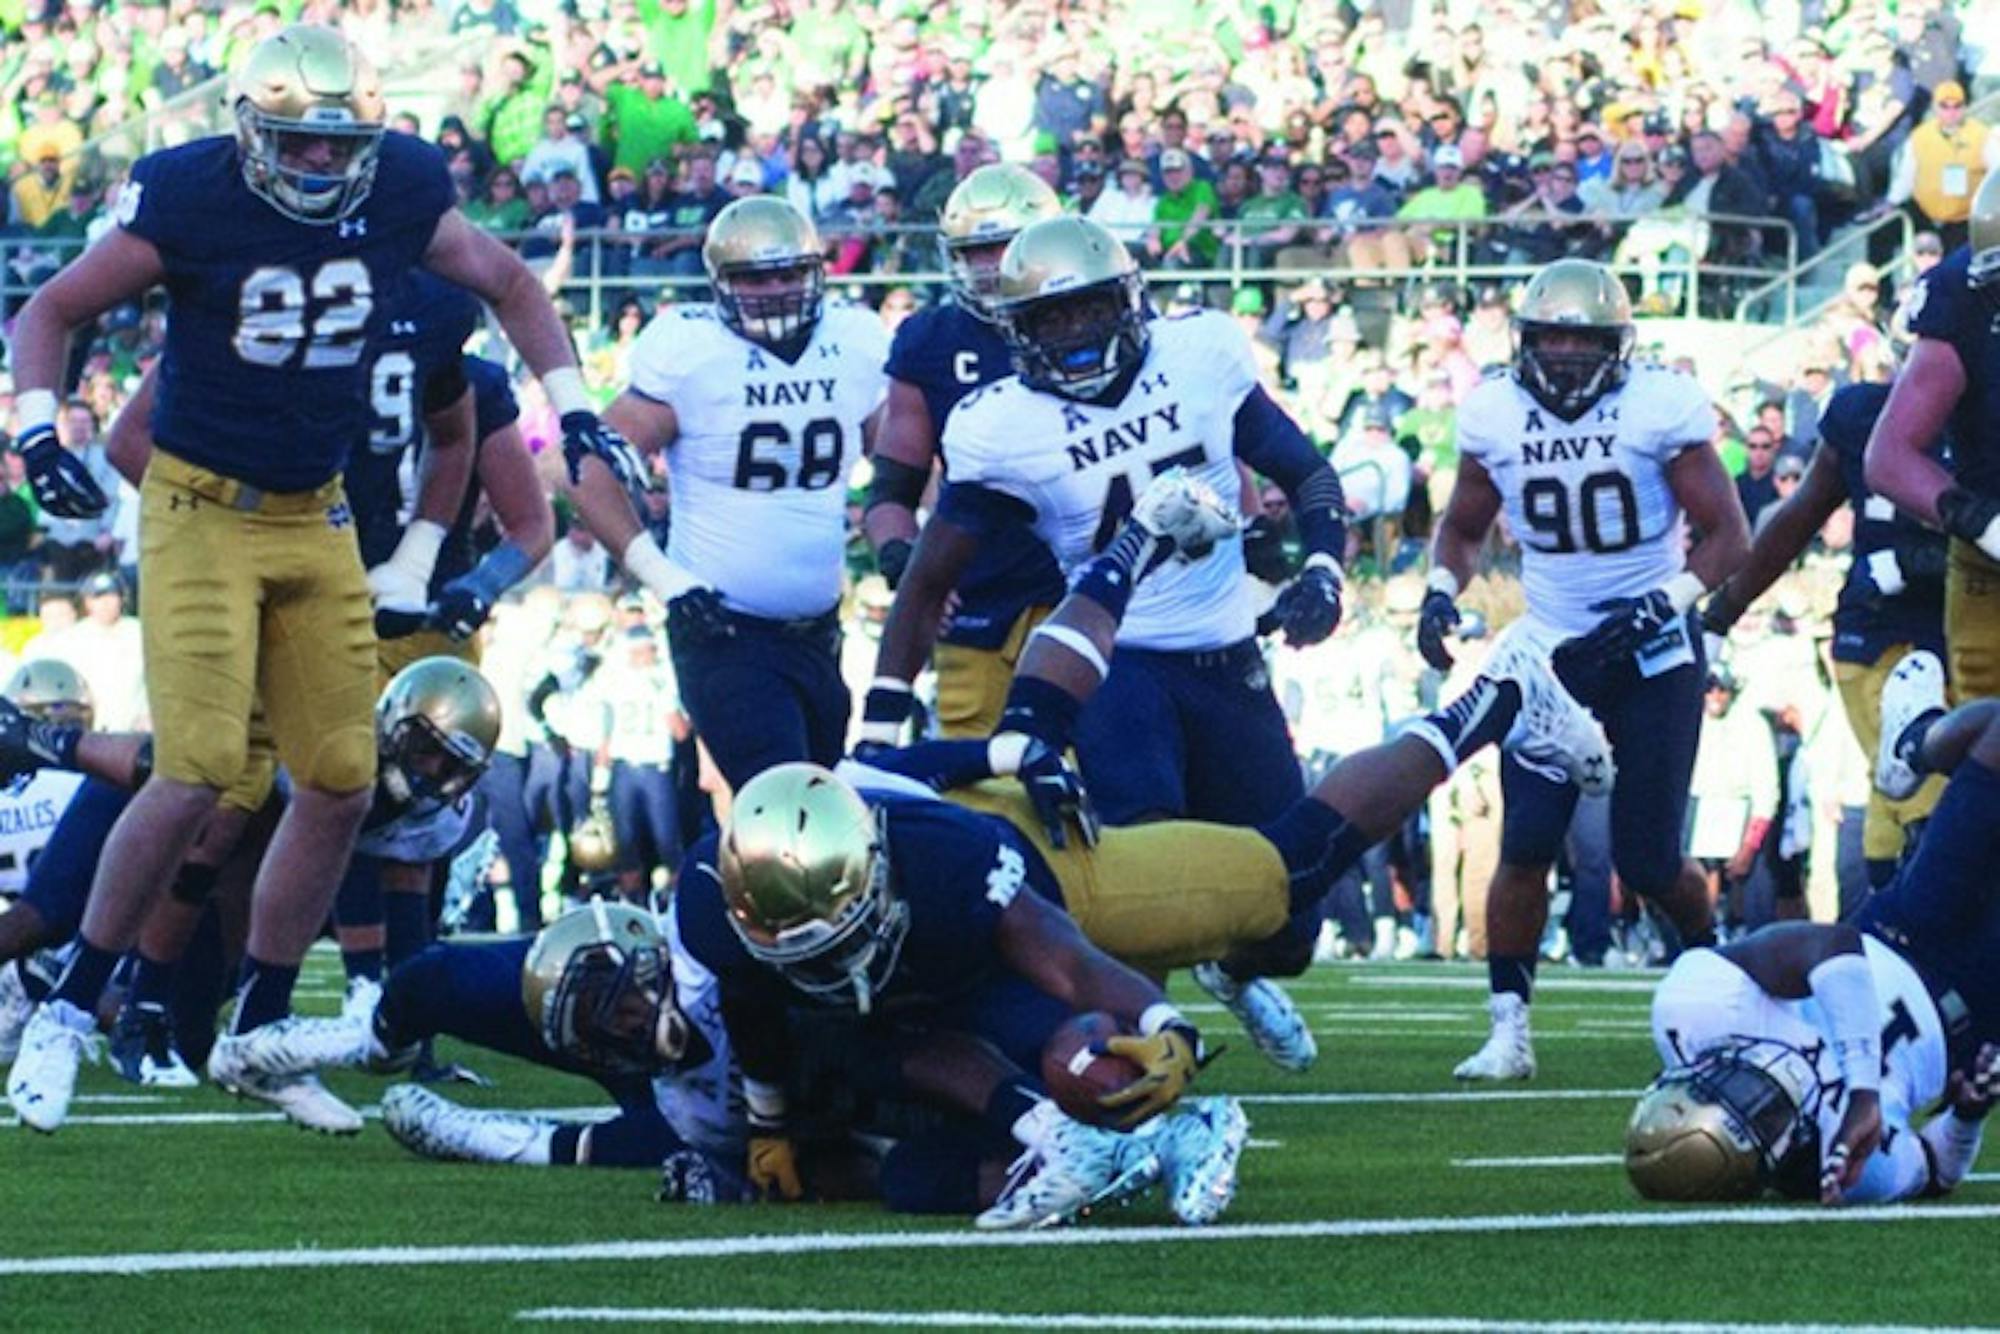 Irish senior running back C.J. Prosise stretches across the goal line for one of his three touchdowns  Saturday during Notre Dame’s 41-24 victory over Navy at Notre Dame Stadium.